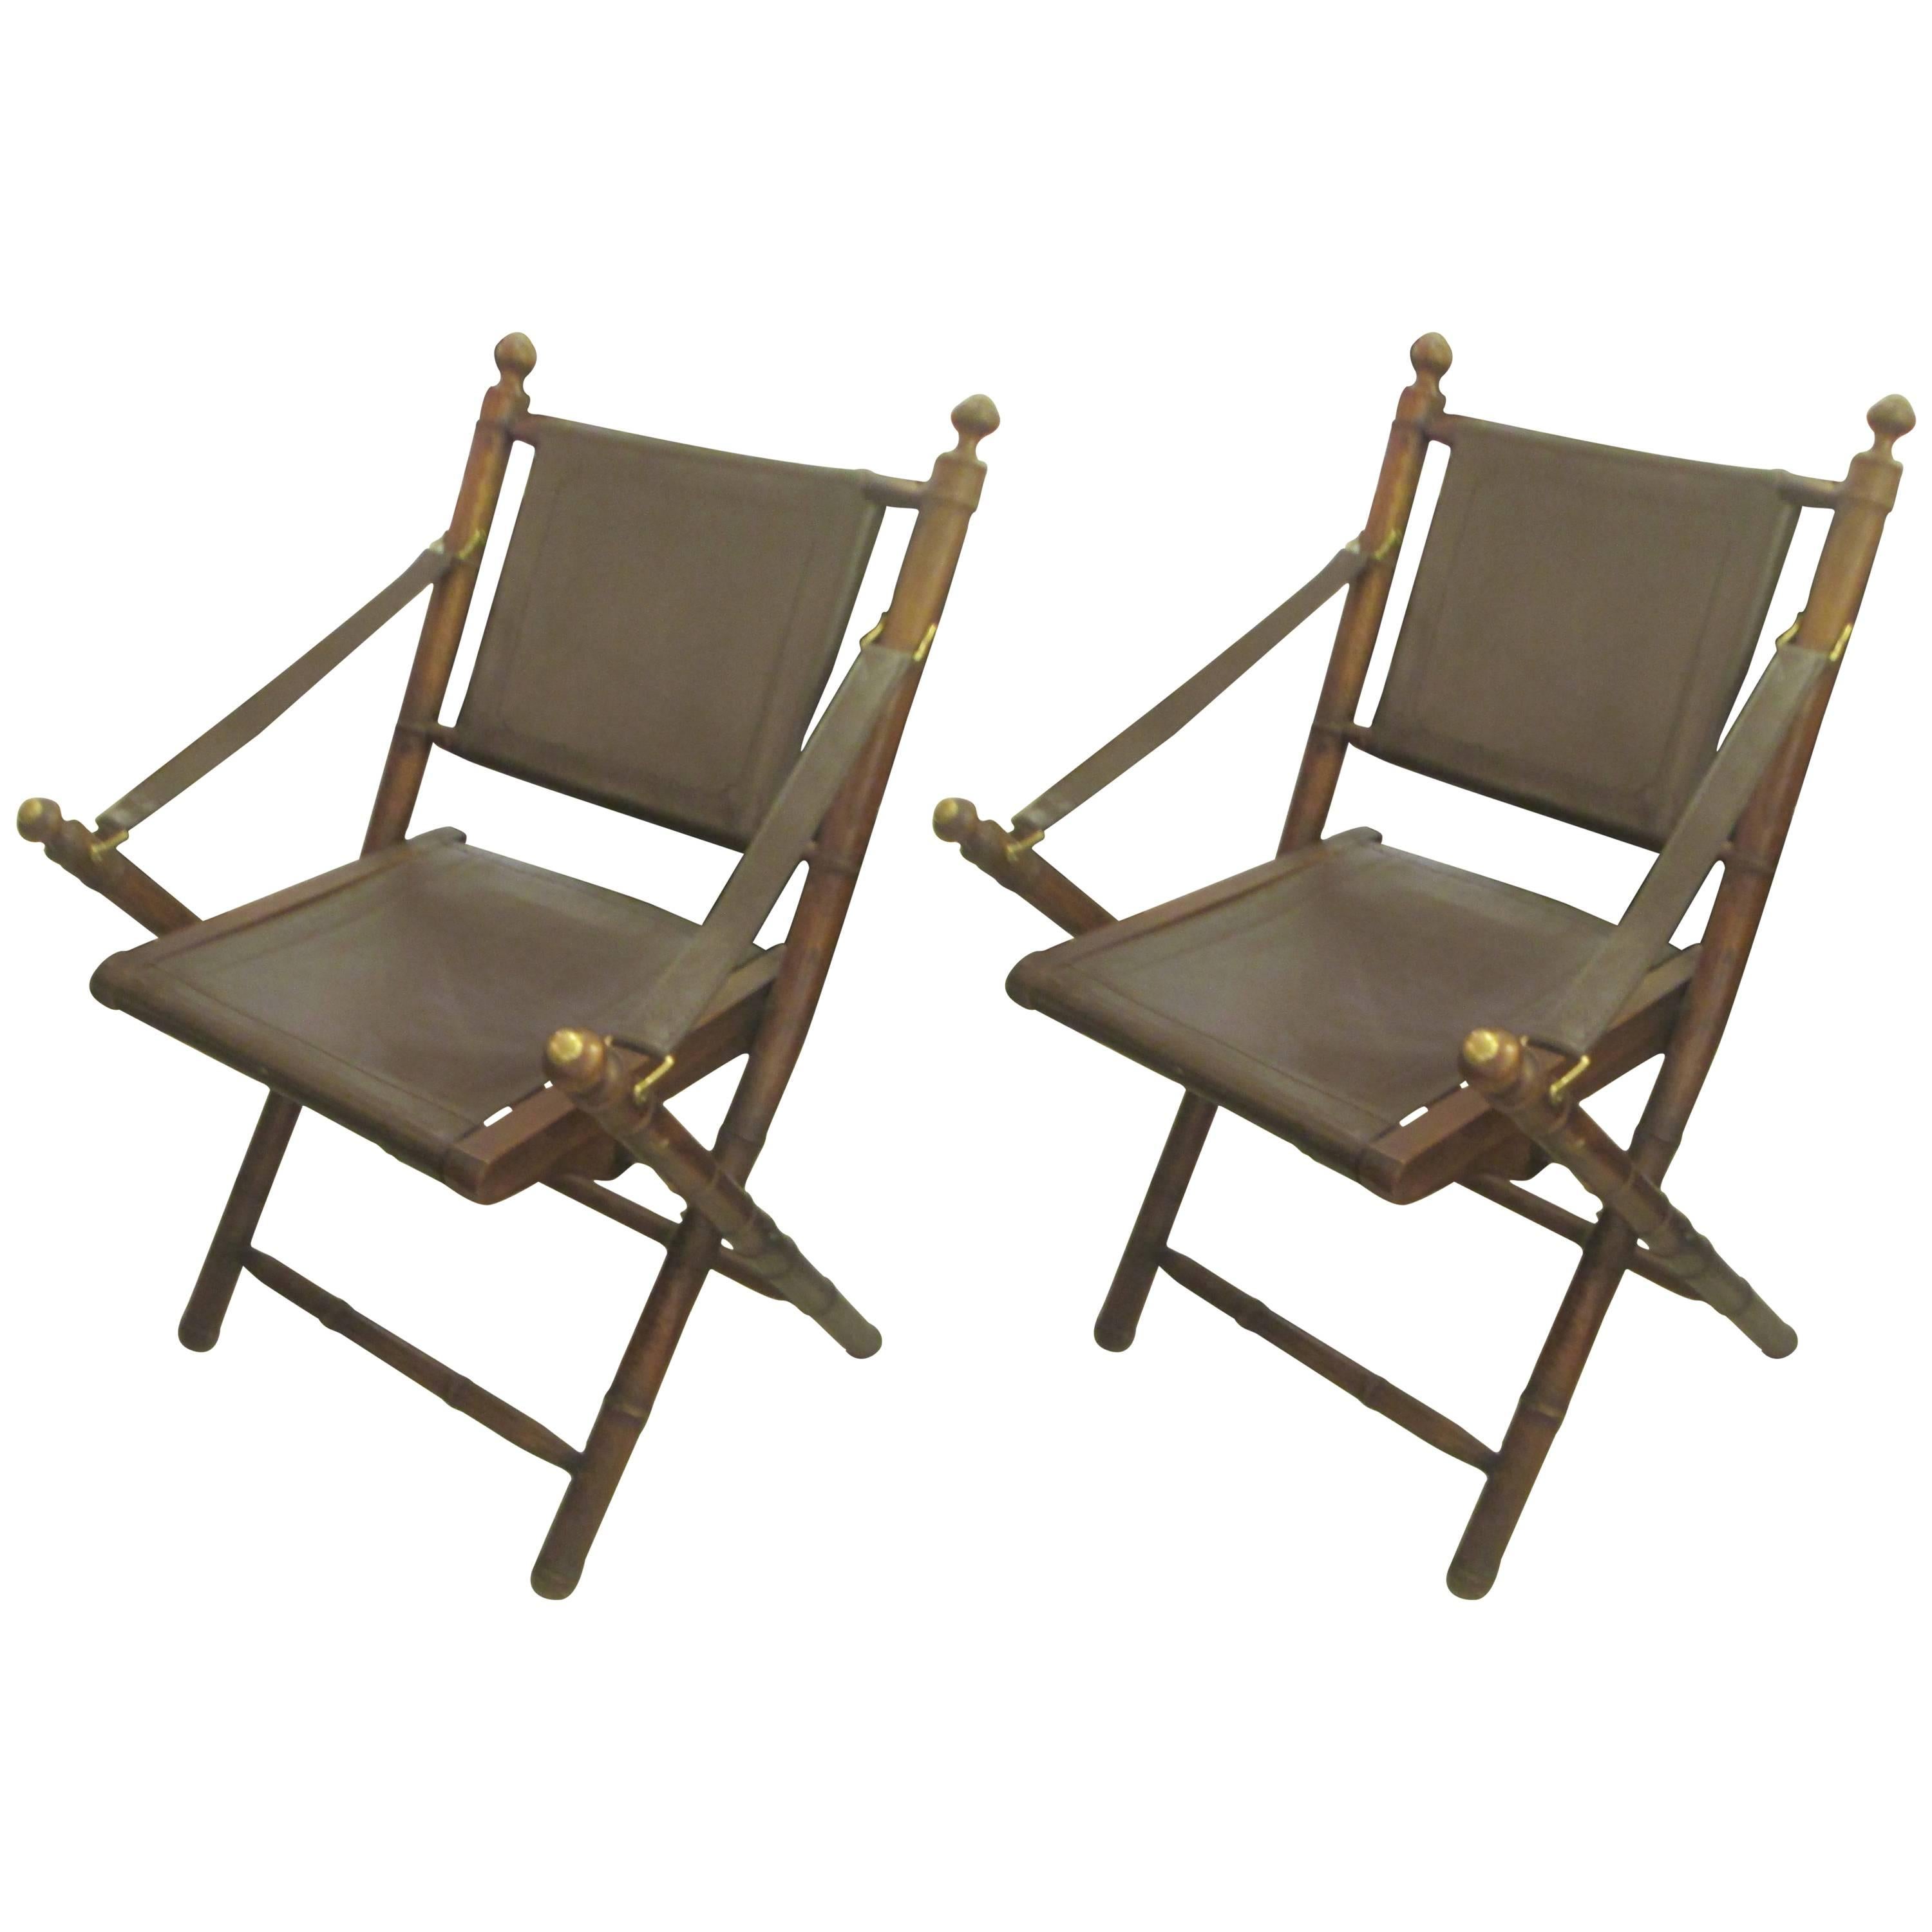 Pair of Hand-Stitched Leather and Faux-Bamboo Campaign Folding Chairs